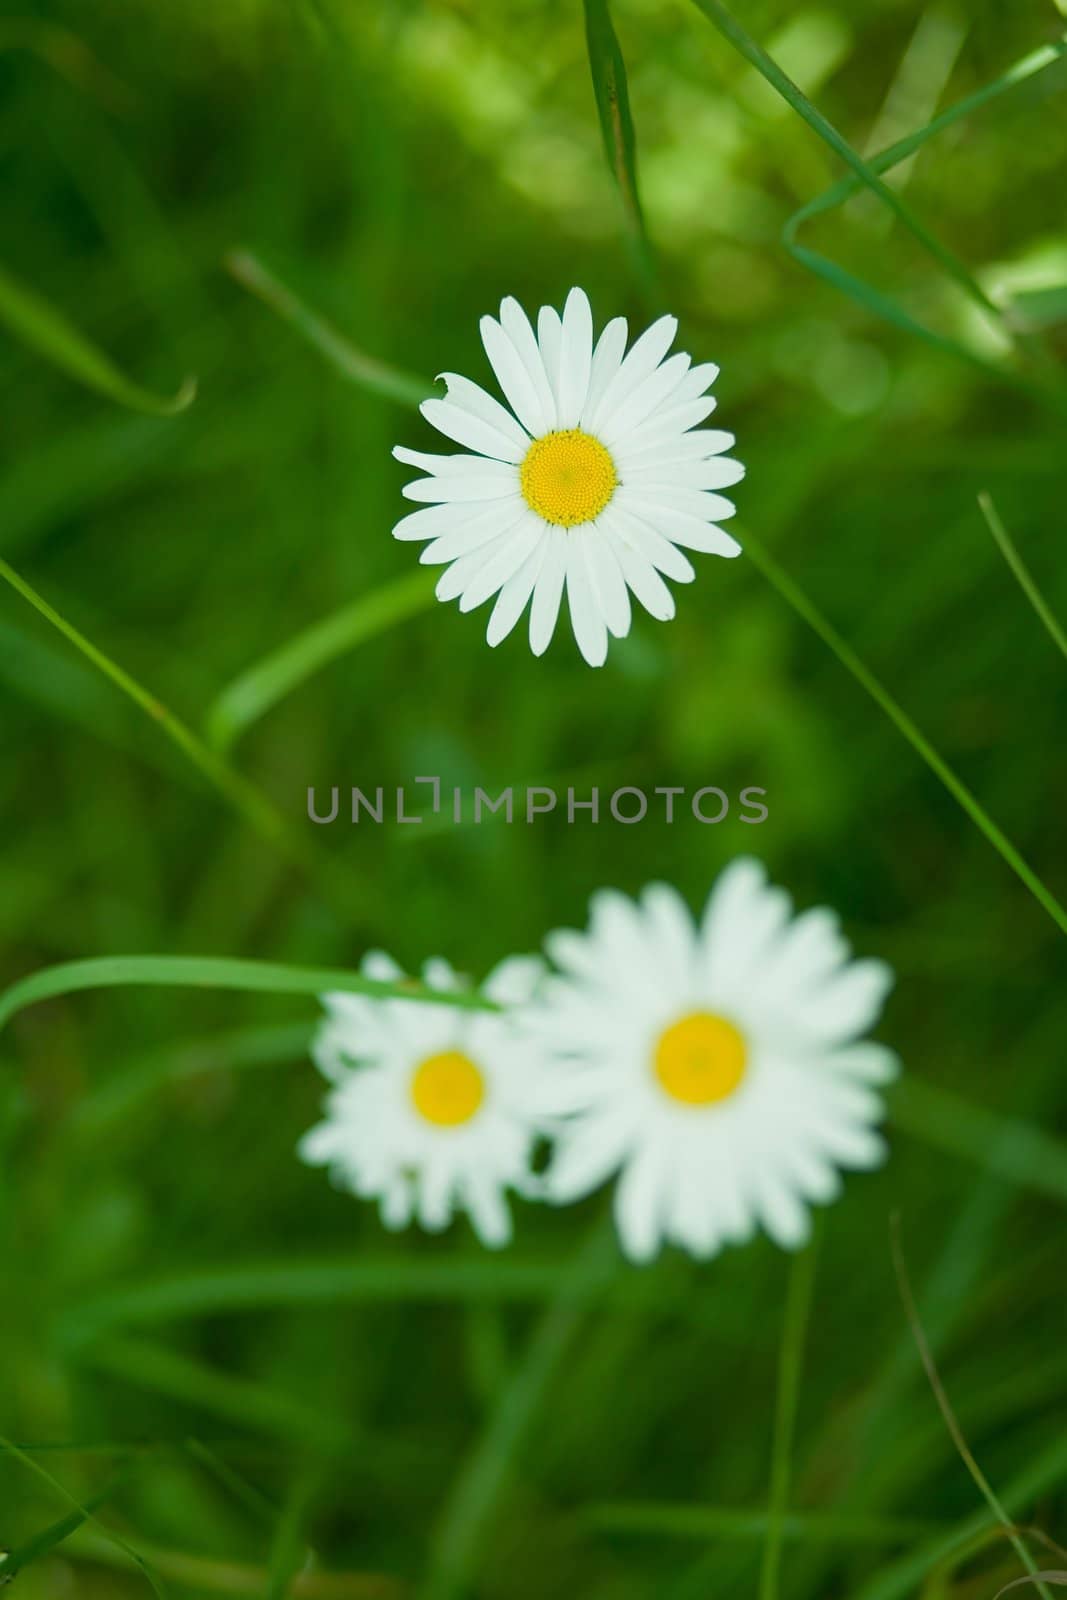 An image of white camomiles on green grass